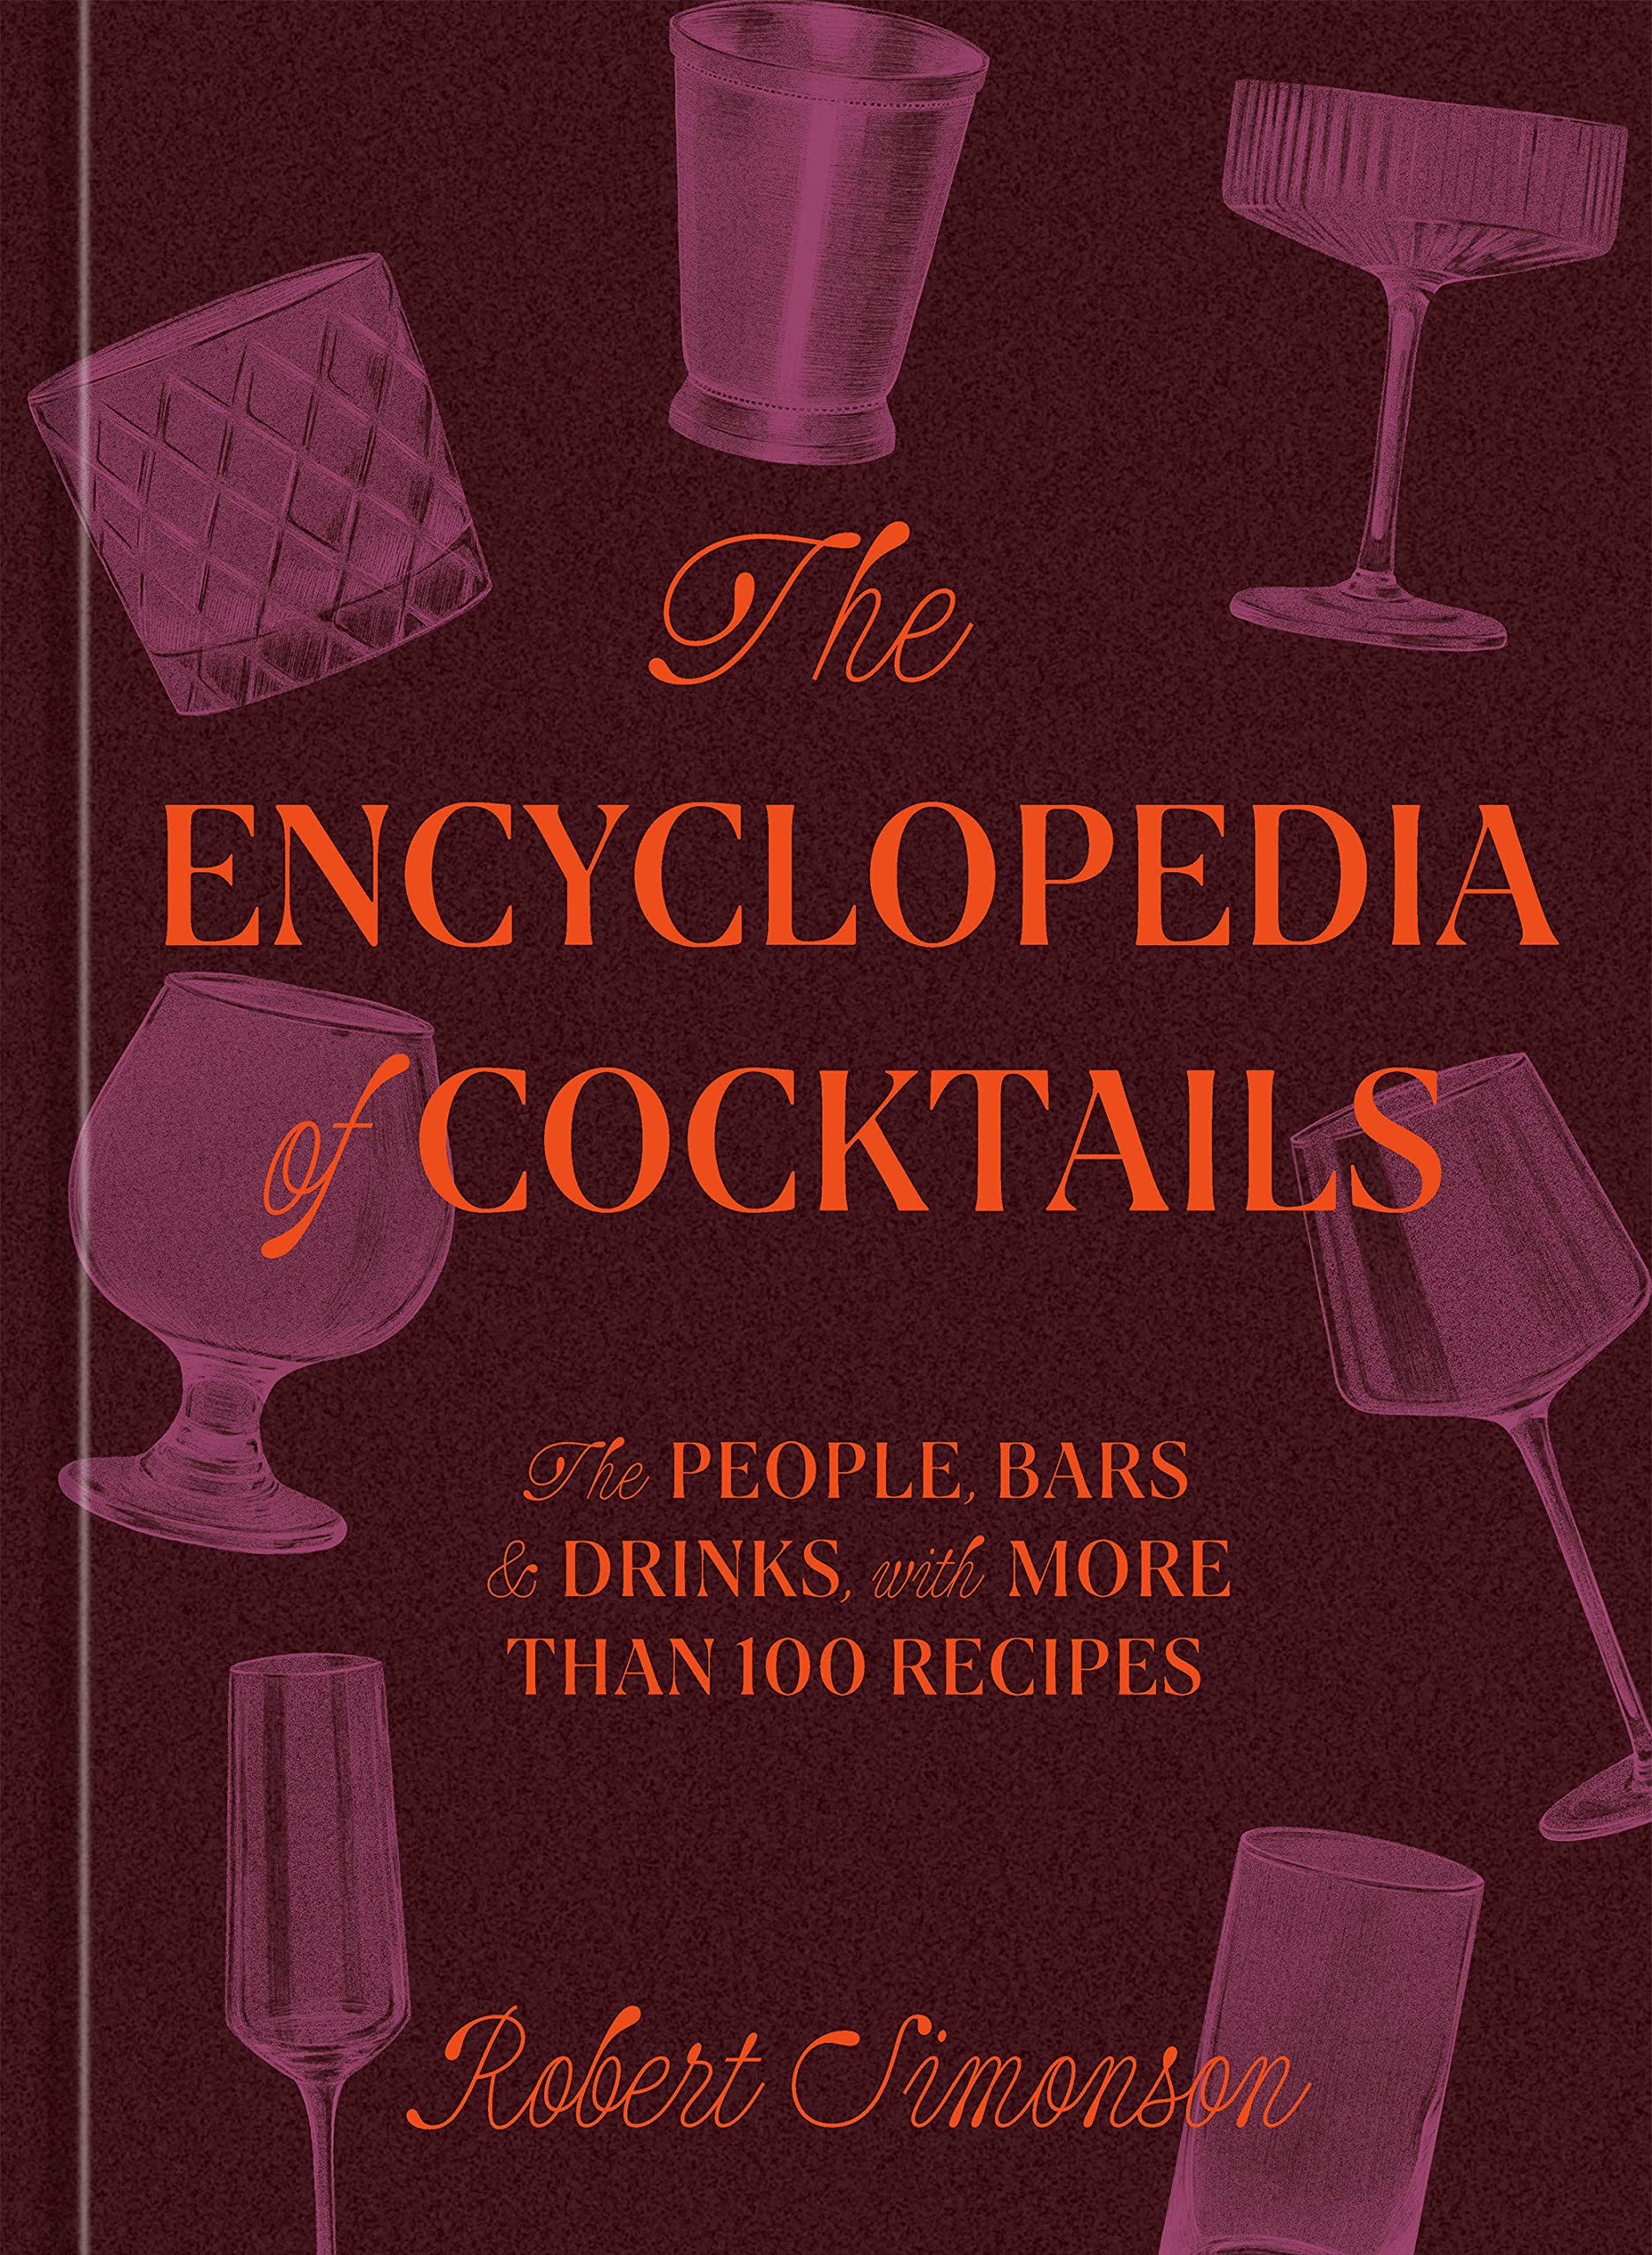 The Encyclopedia of Cocktails: The People, Bars & Drinks, with More Than 100 Recipes (Robert Simonson) *Signed*